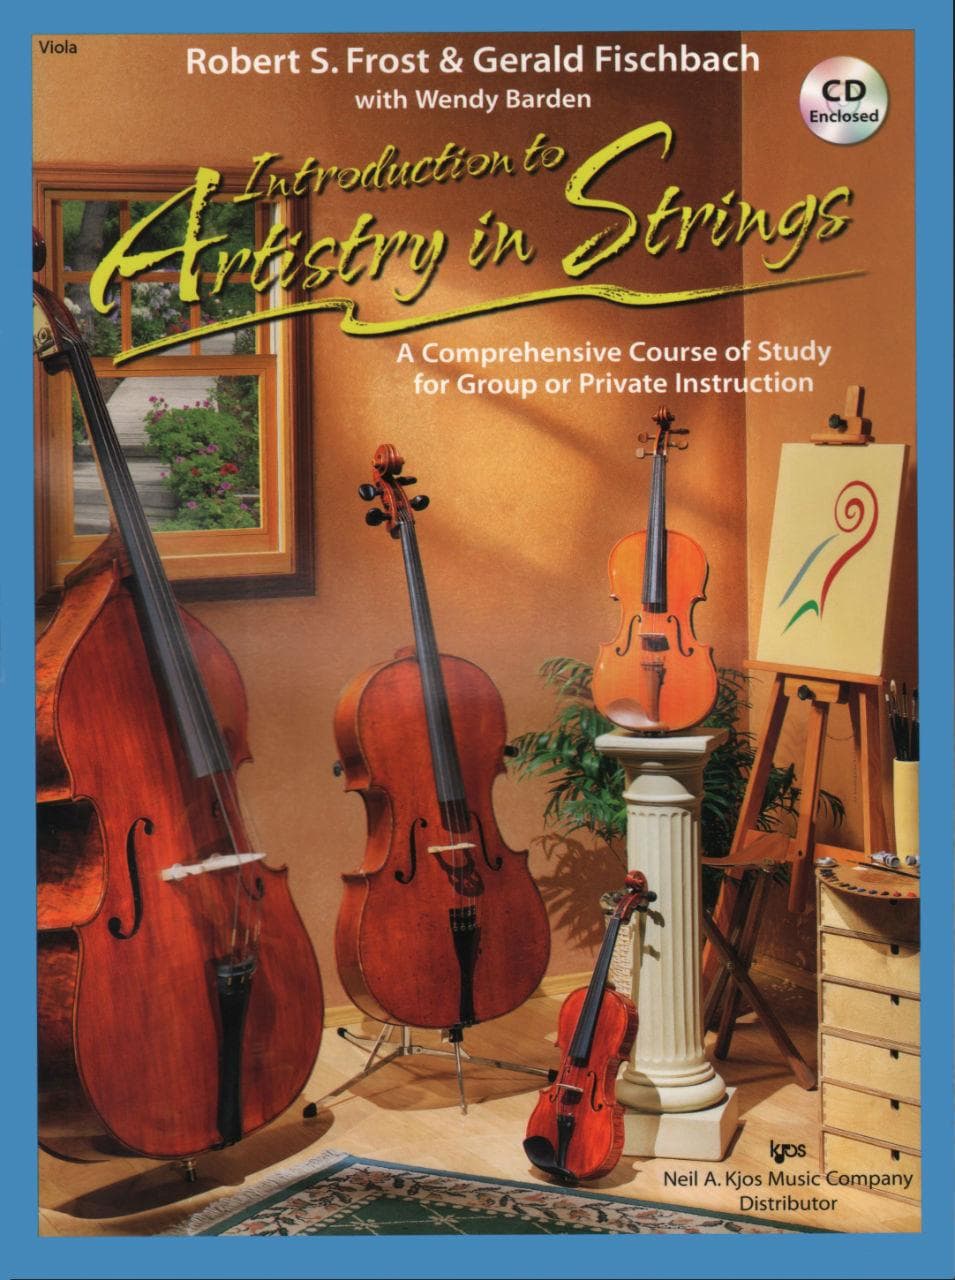 Fischbach/Frost/Barden - Introduction to Artistry in Strings - Viola -Kjos Music Co